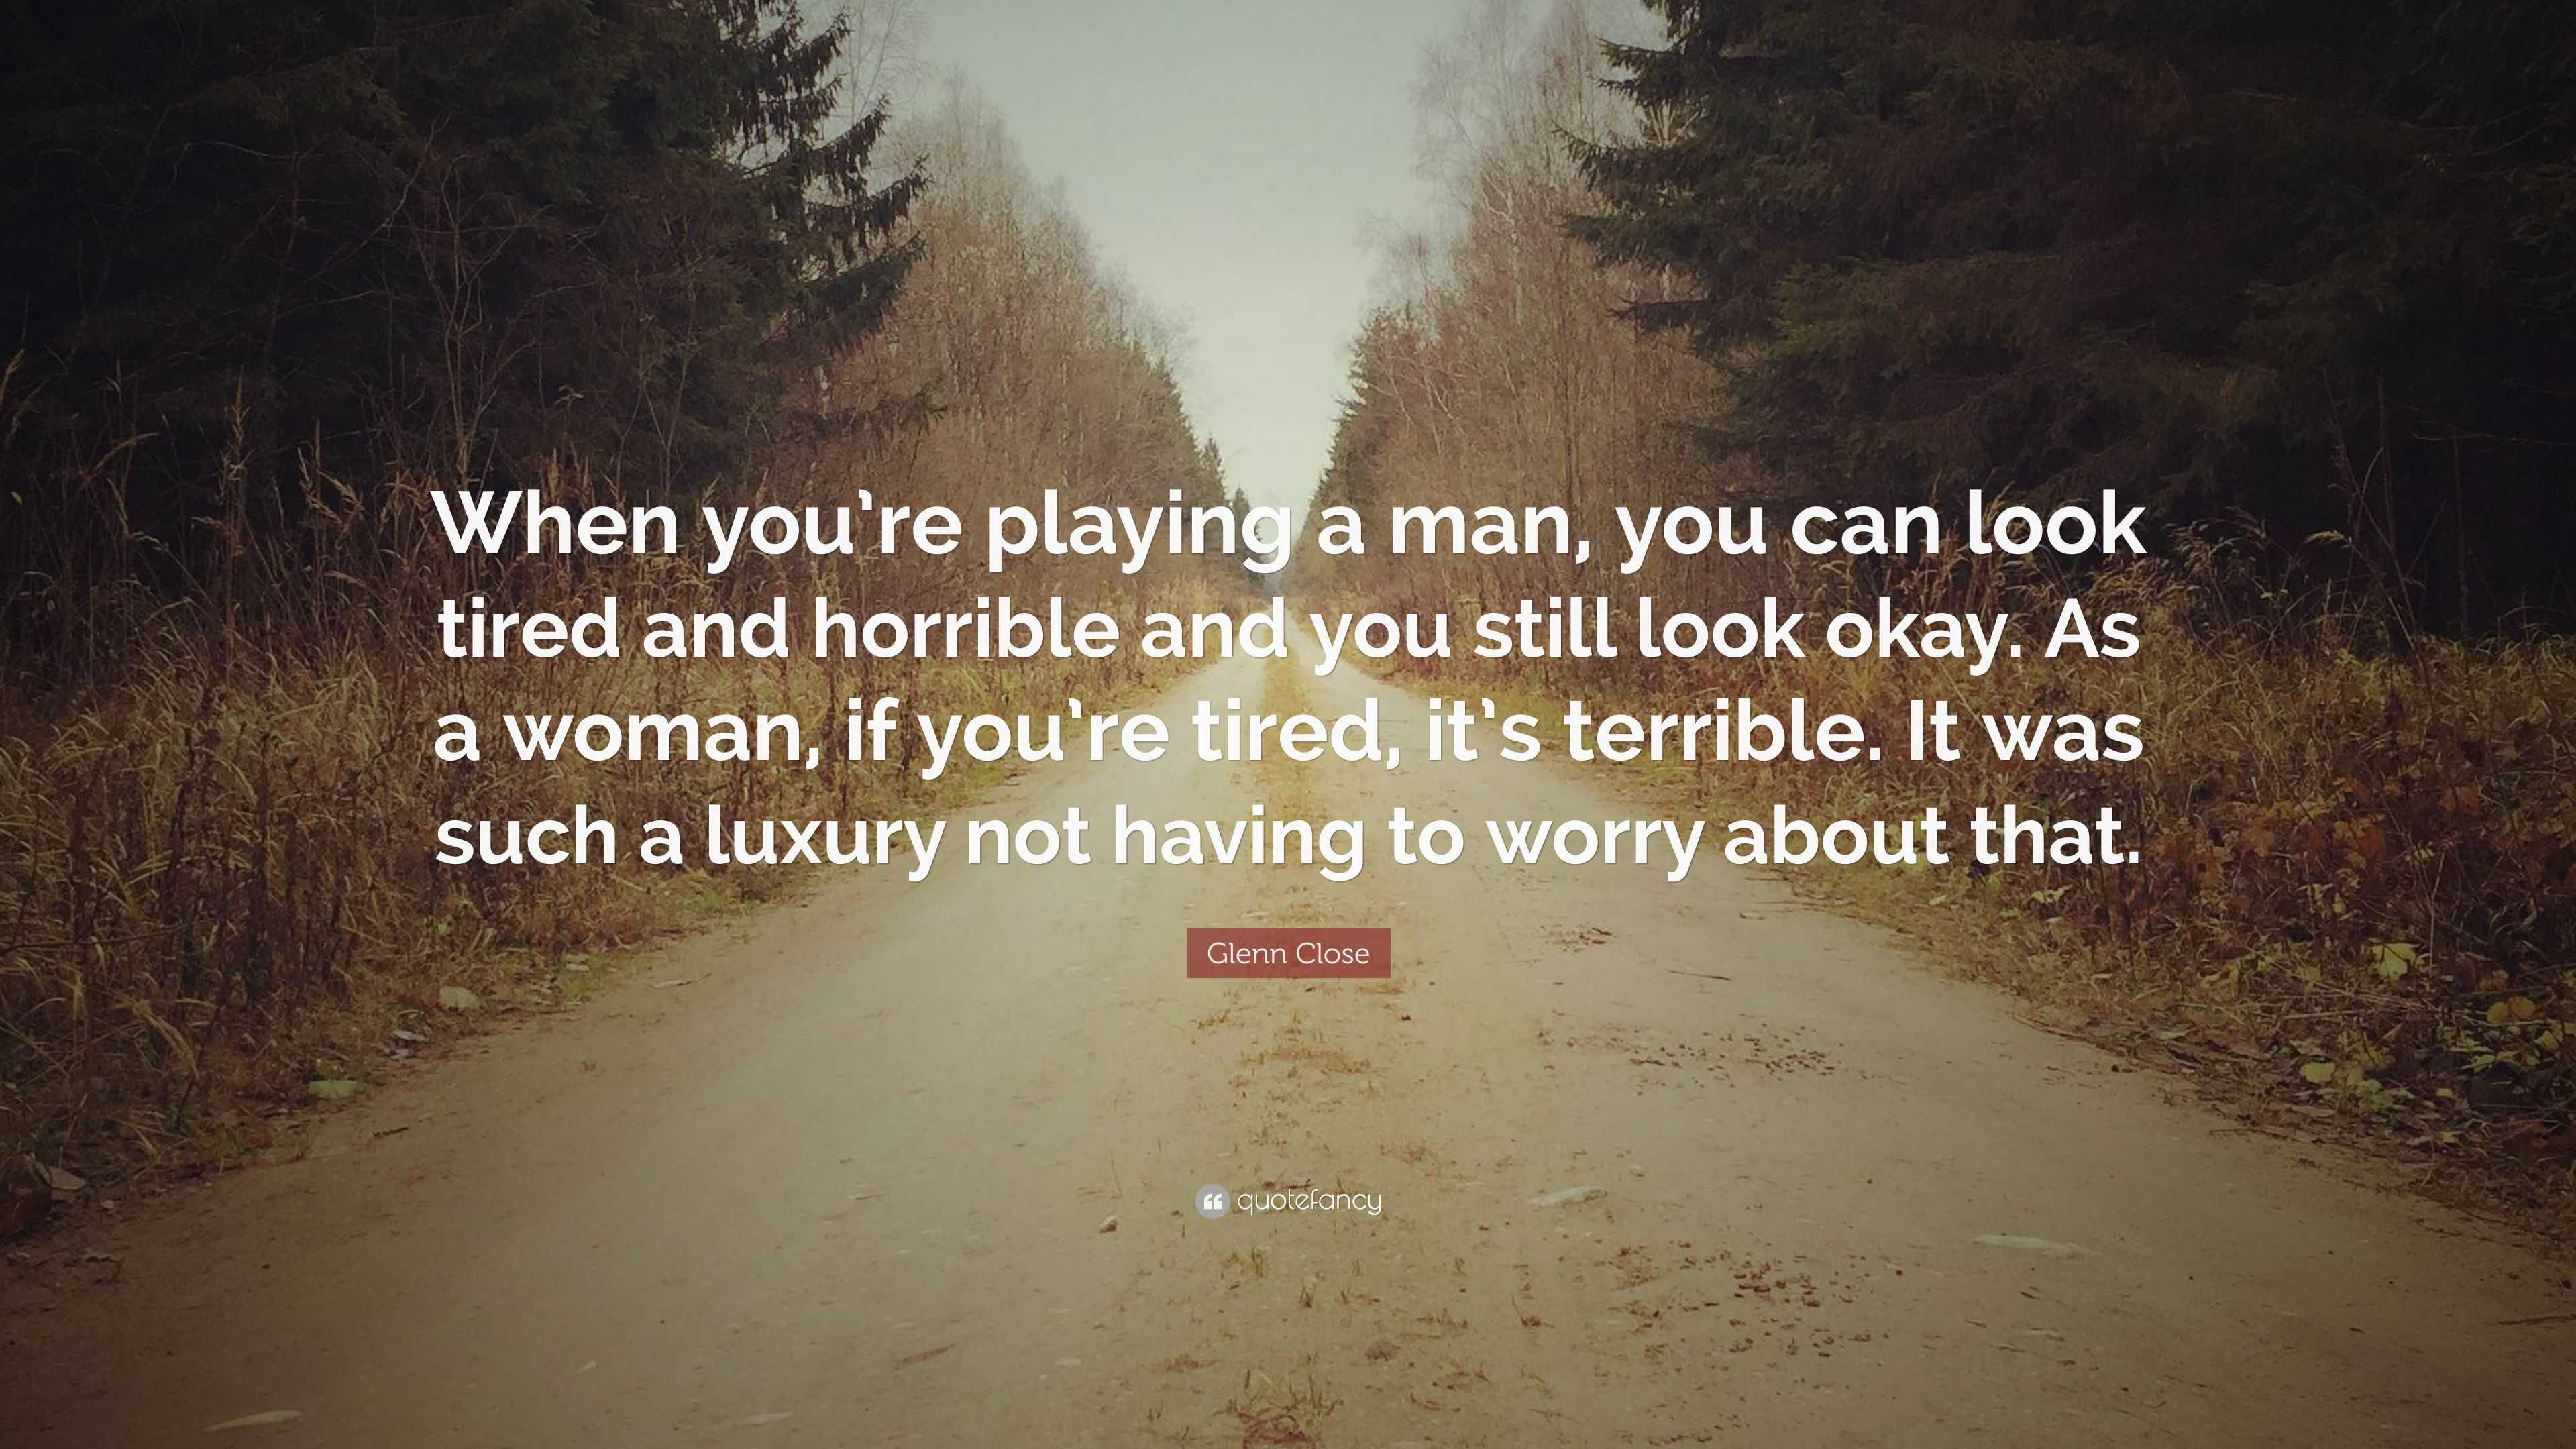 Glenn Close Quote: “When you’re playing a man, you can look tired and ...